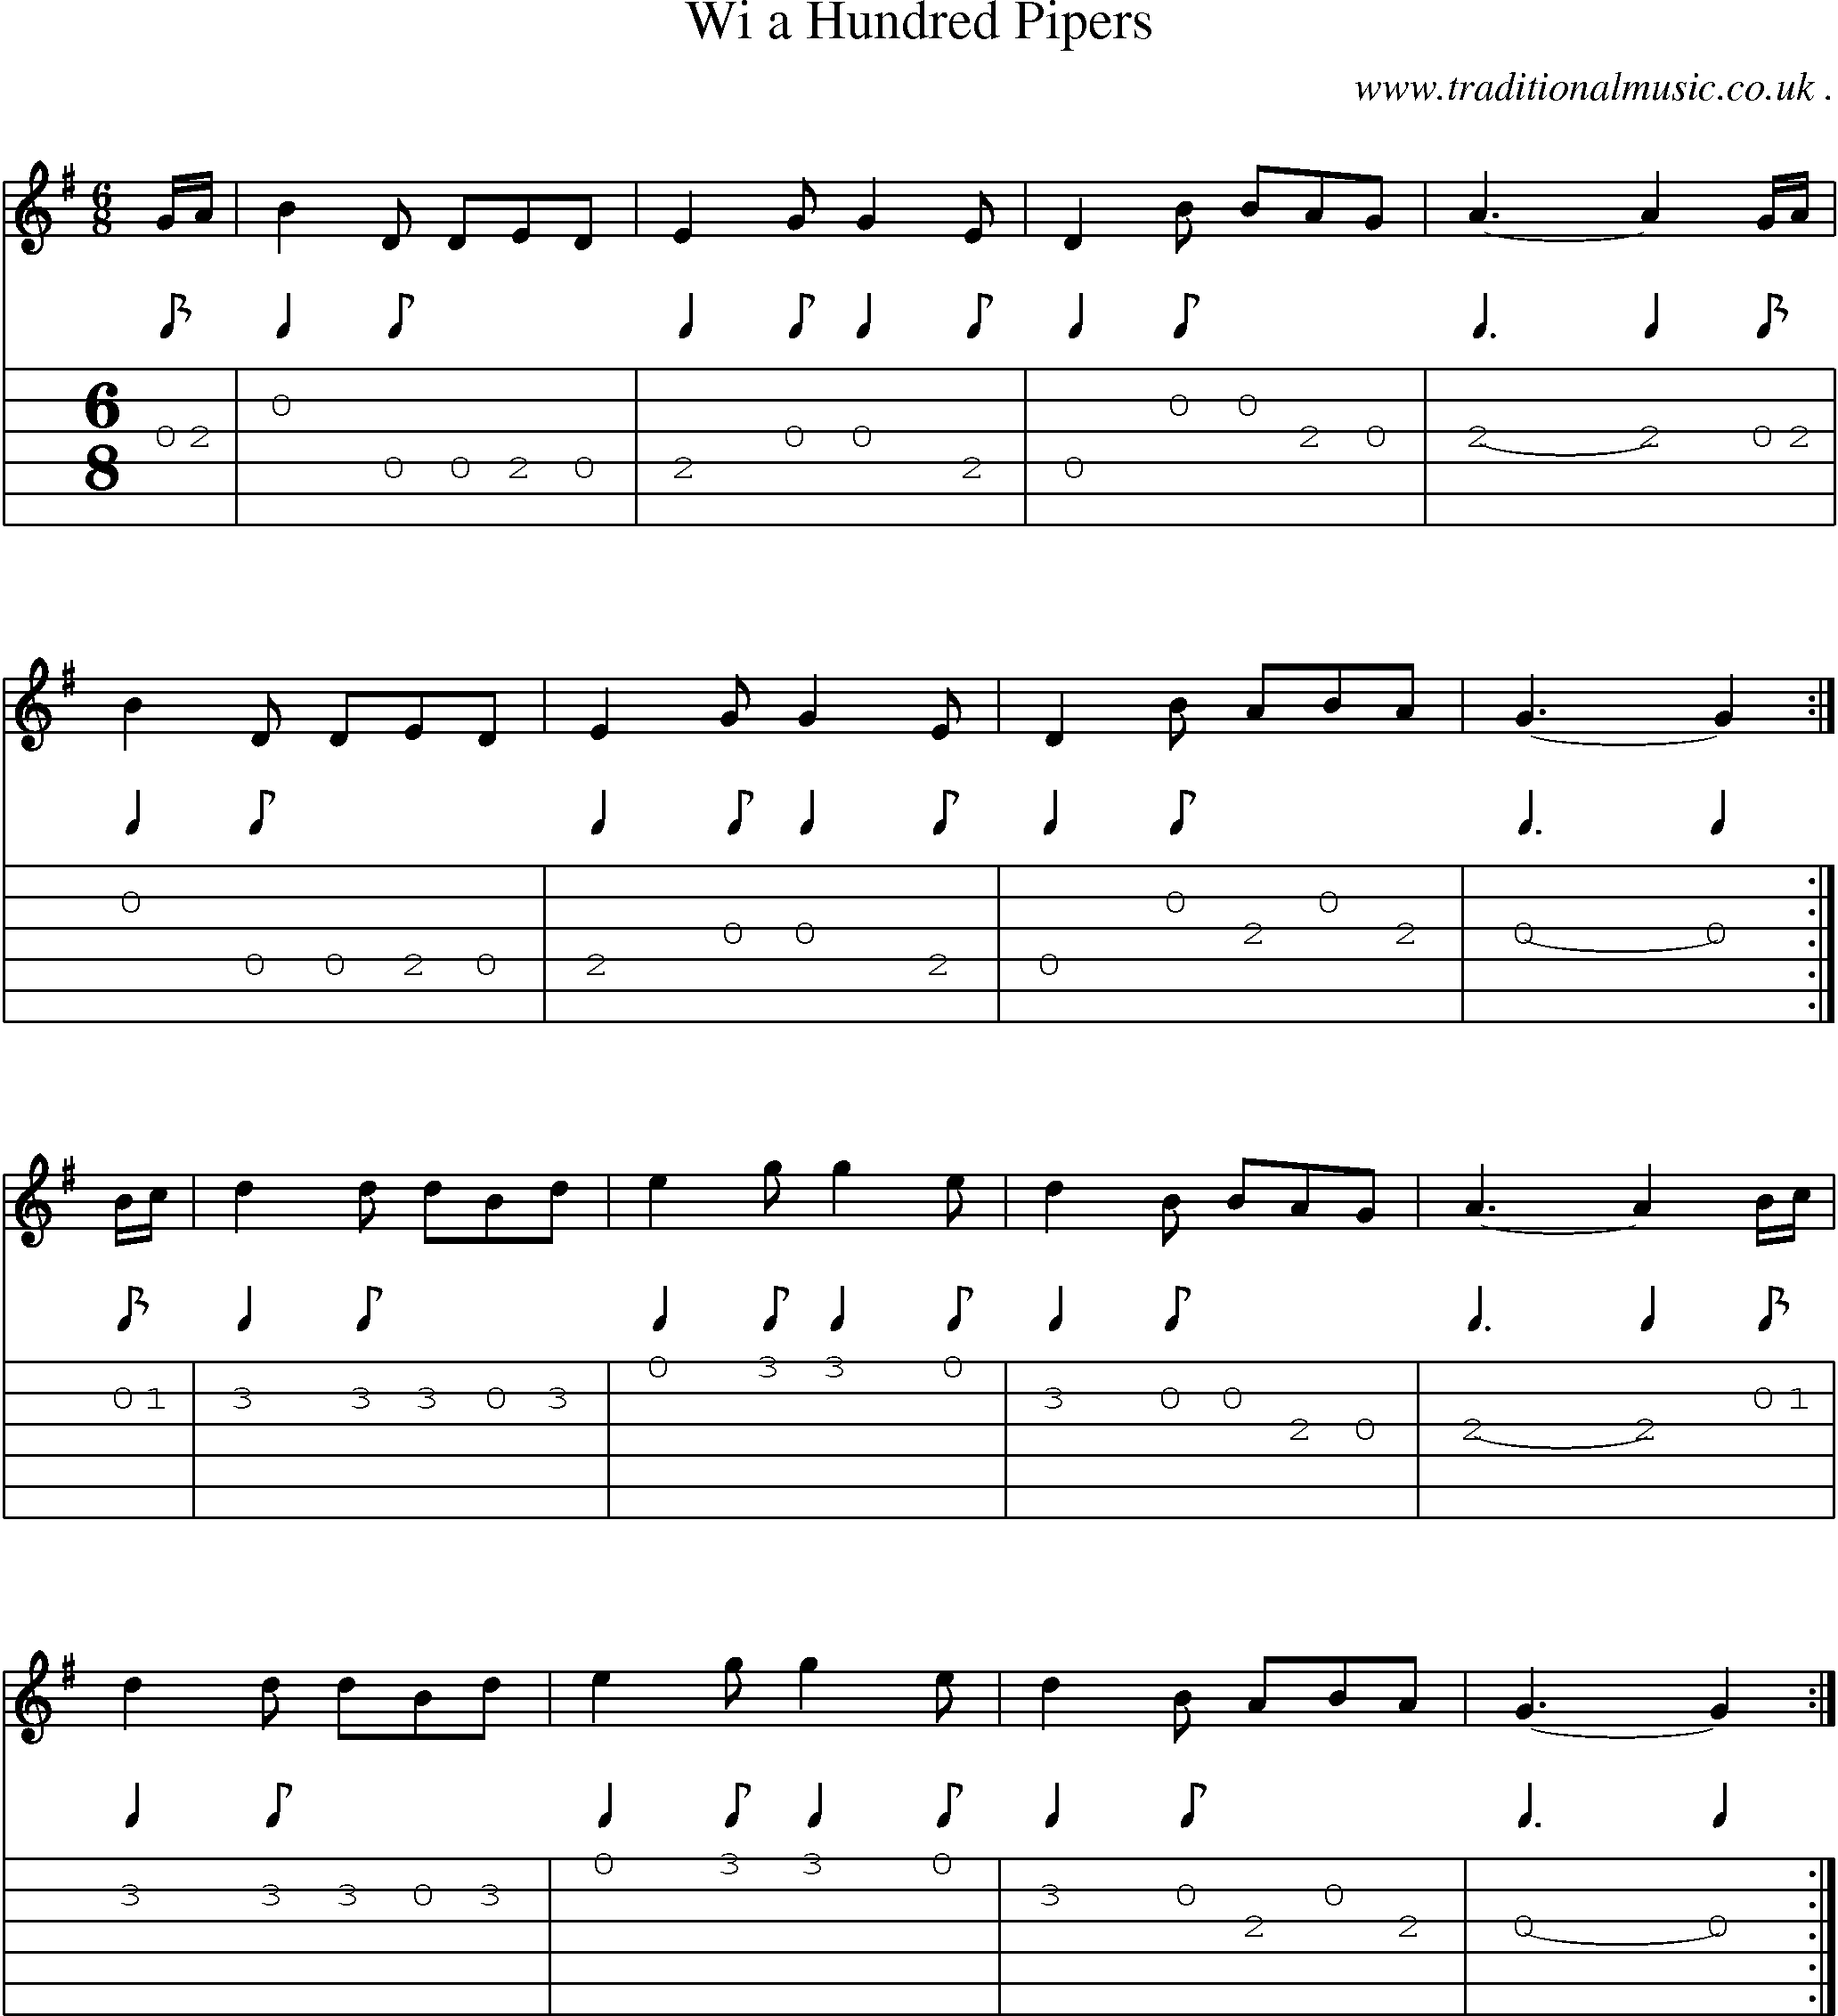 Sheet-music  score, Chords and Guitar Tabs for Wi A Hundred Pipers